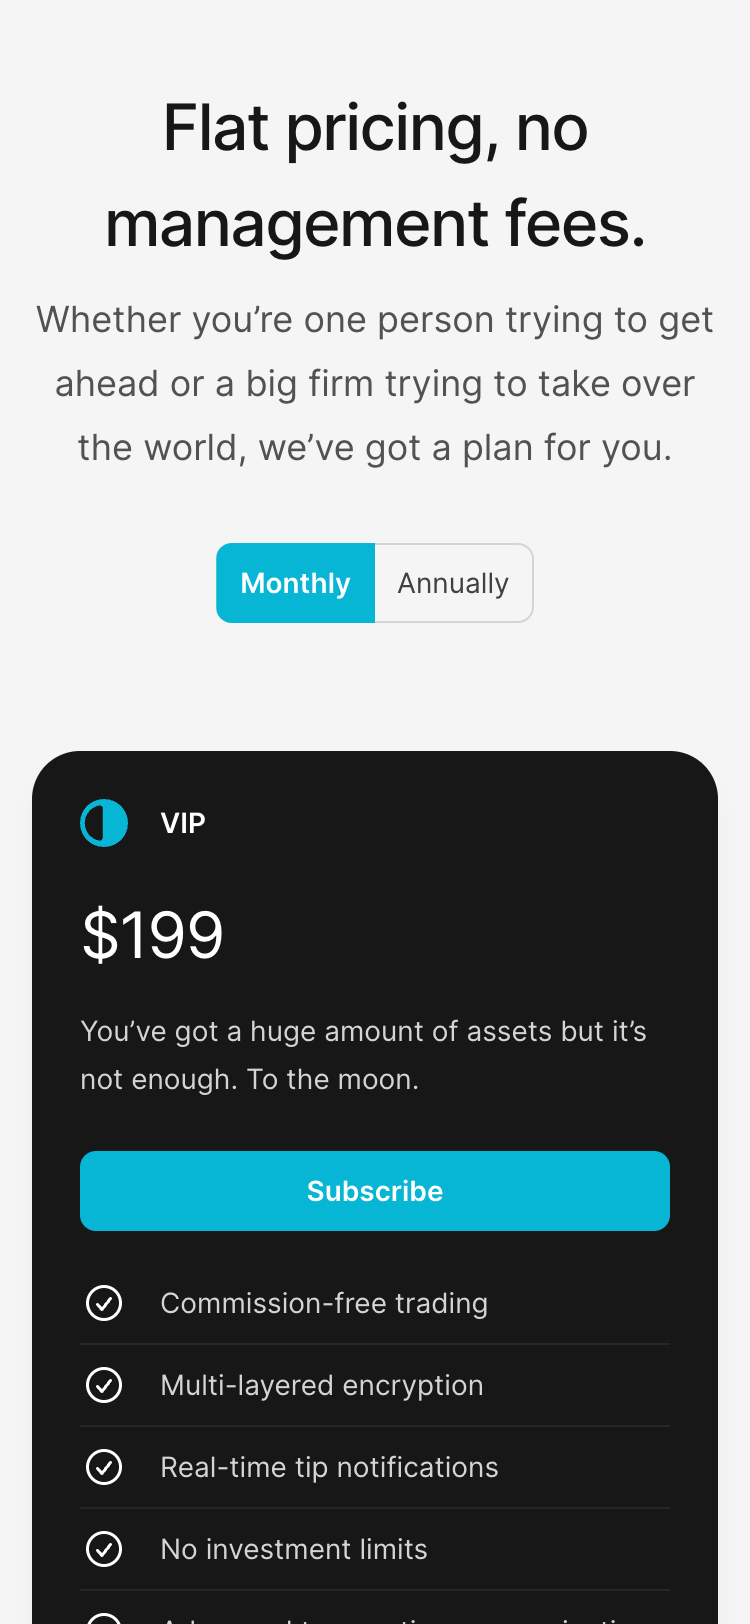 Mobile screenshot of the pricing section of the Pocket Tailwind UI template. There is a section heading and introduction paragraph, followed by a time period button group with the options 'Monthly' and 'Annually'. Below is details on the 'VIP' plan including a price, description, list of features, and a 'Subscribe' button.